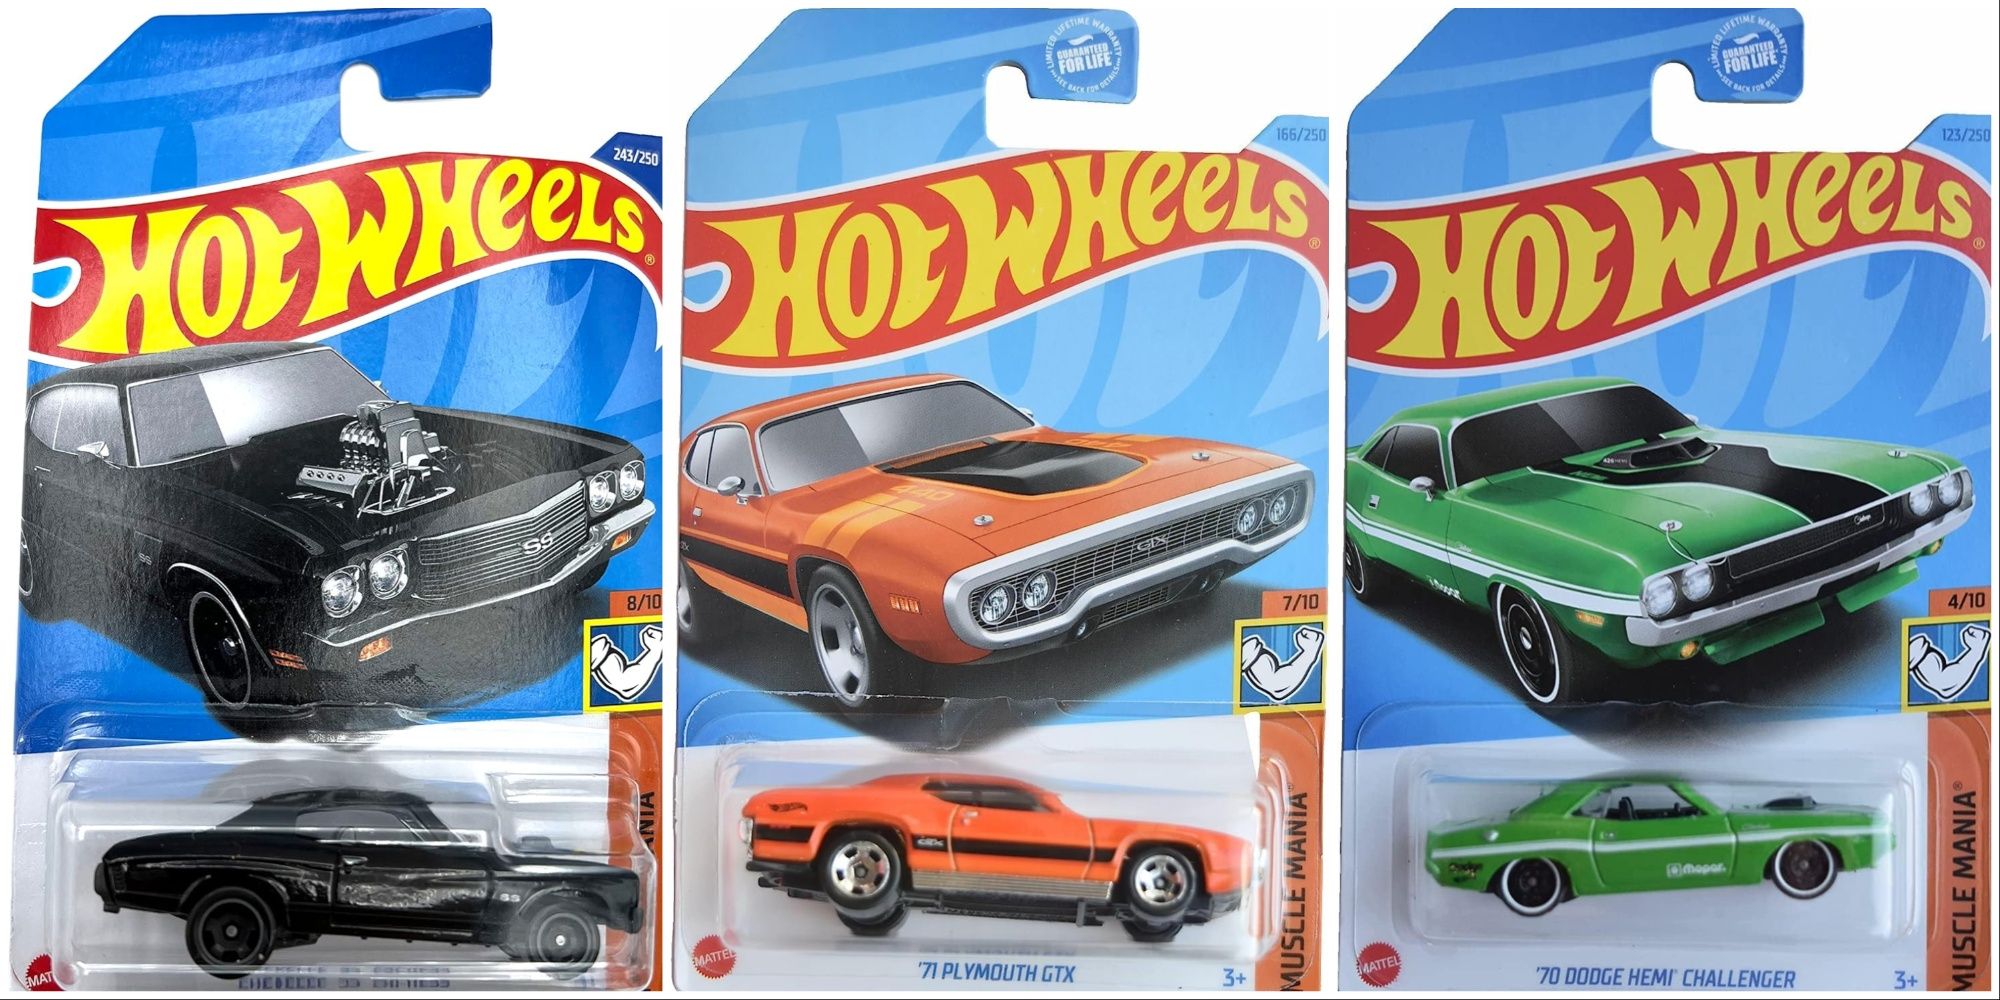 A trio of Hot Wheels Muscle Cars arranged in a row. From left to right, a black Chevelle, an orange Plymouth, and a green Hemi.